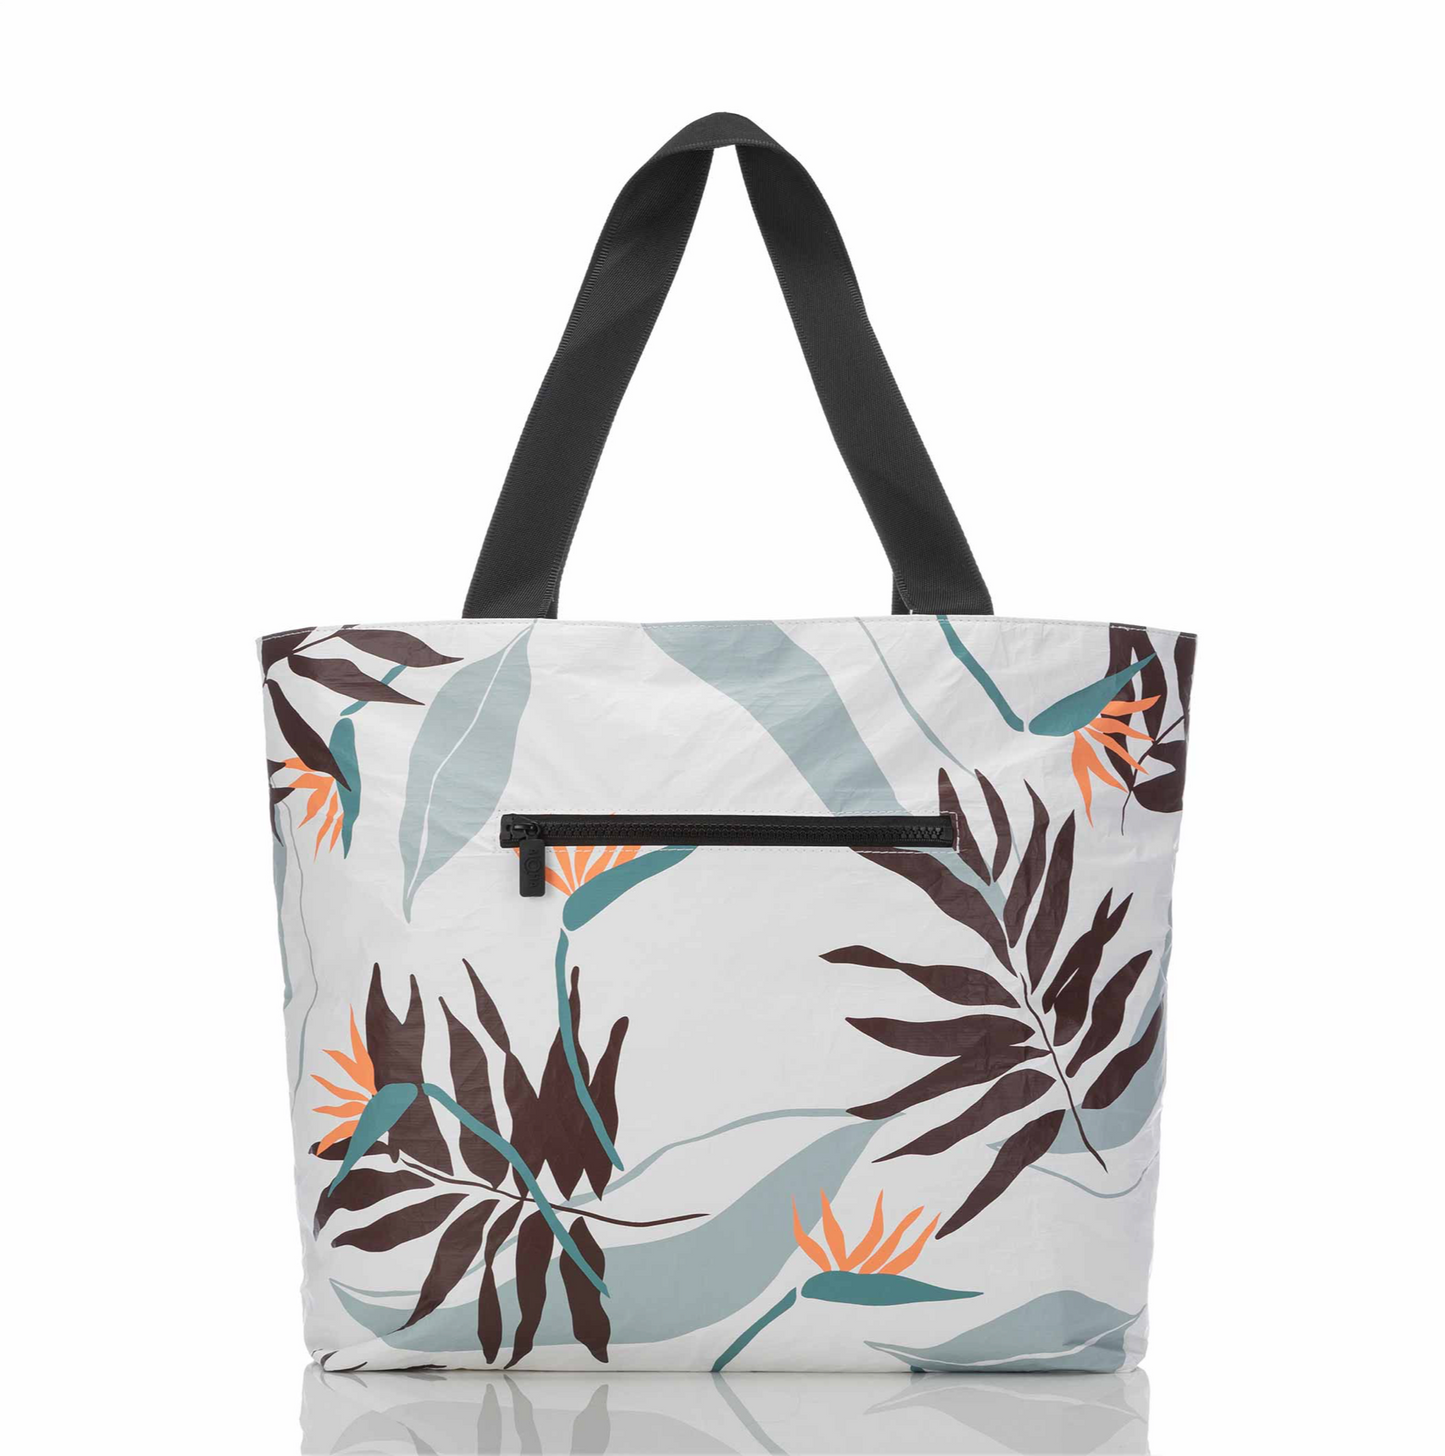 Painted Birds - Day Tripper Tote